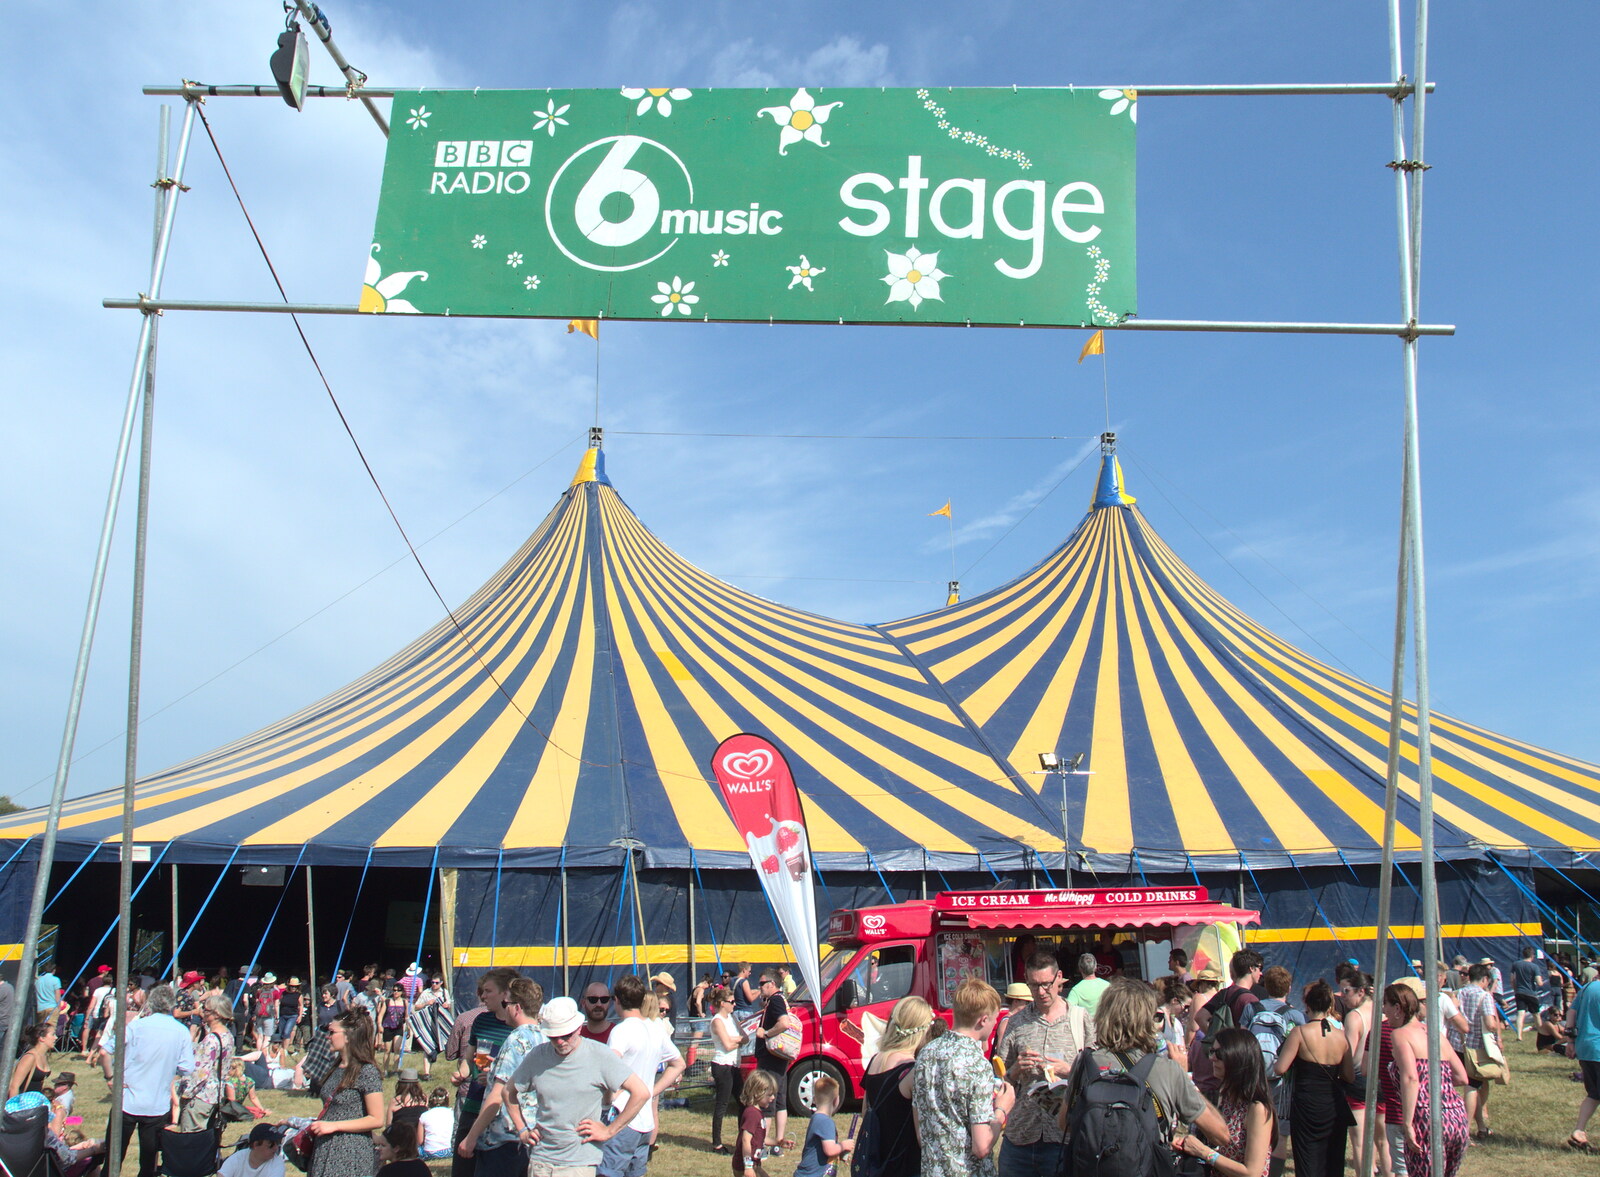 The 6Music stage from Latitude Festival, Henham Park, Southwold, Suffolk - 17th July 2014